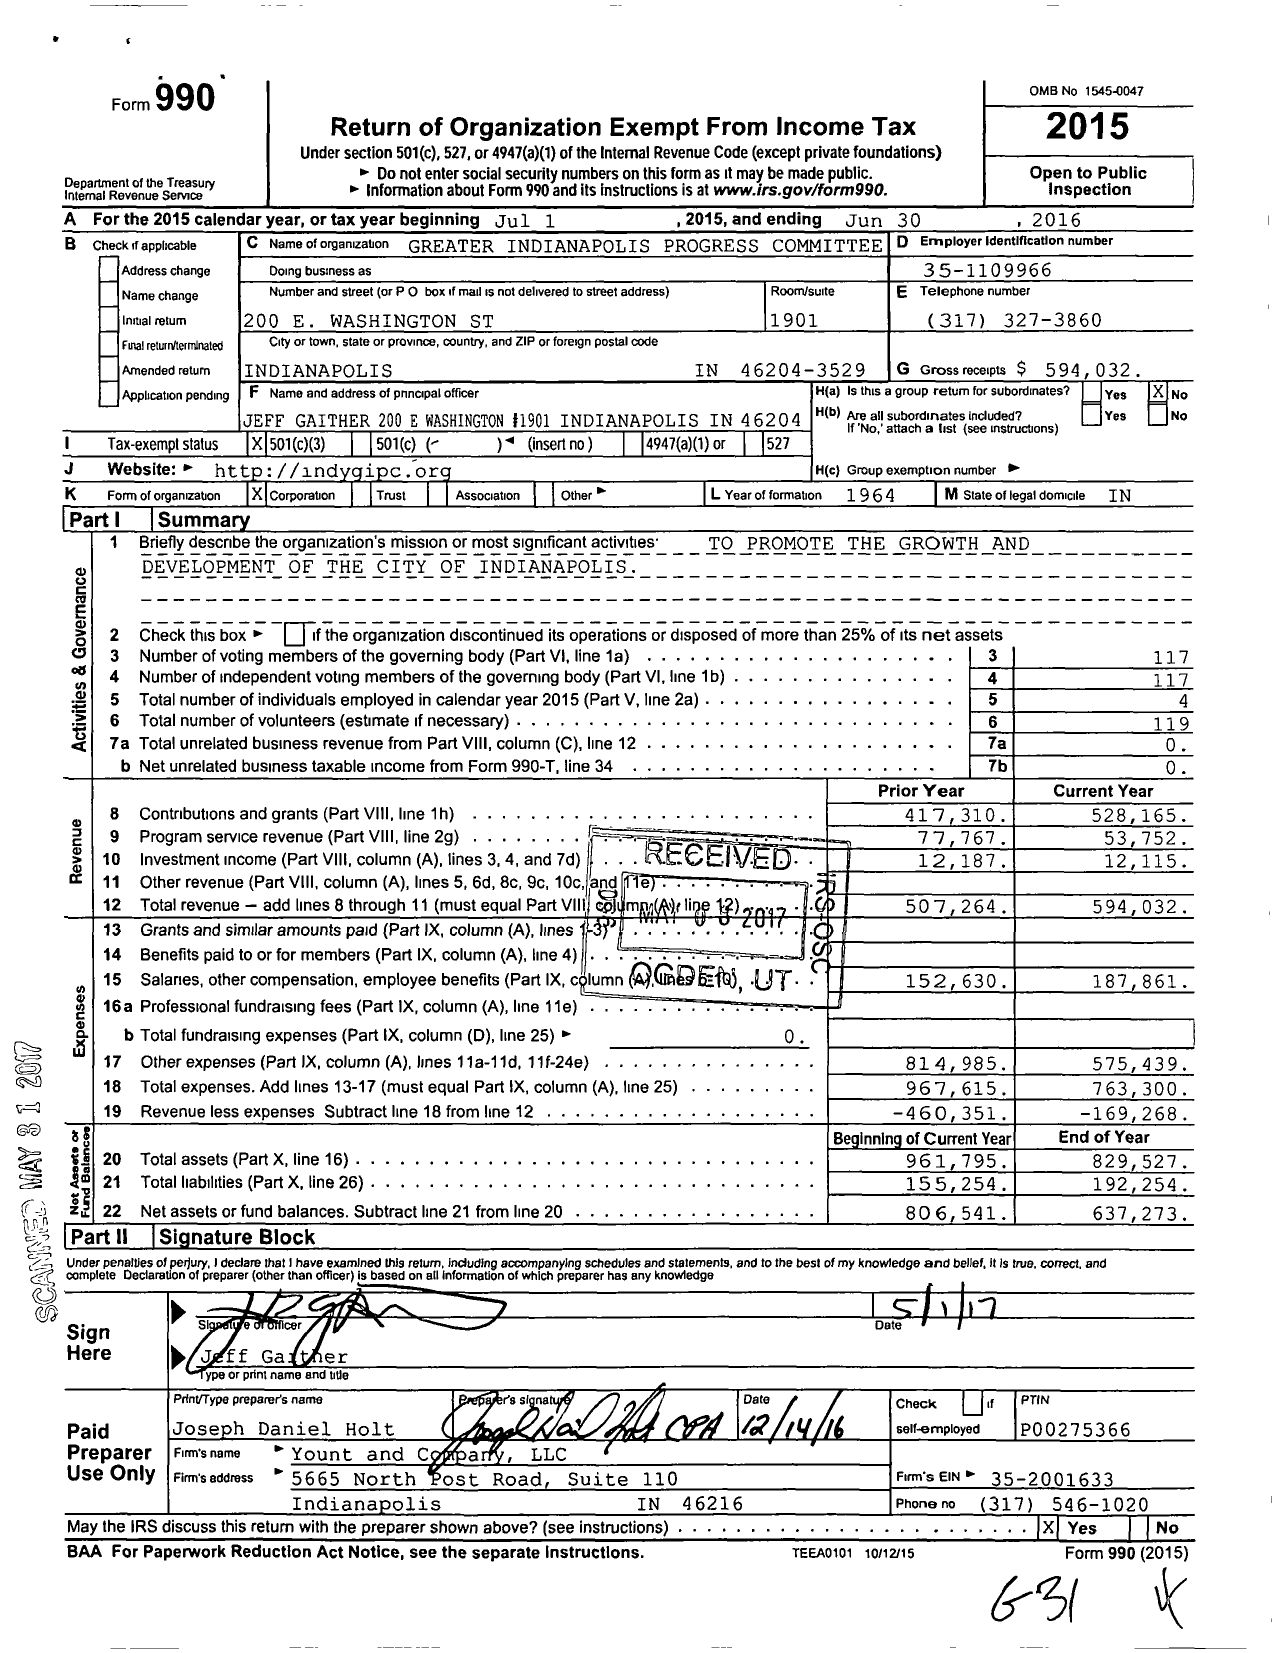 Image of first page of 2015 Form 990 for Greater Indianapolis Progress Committee